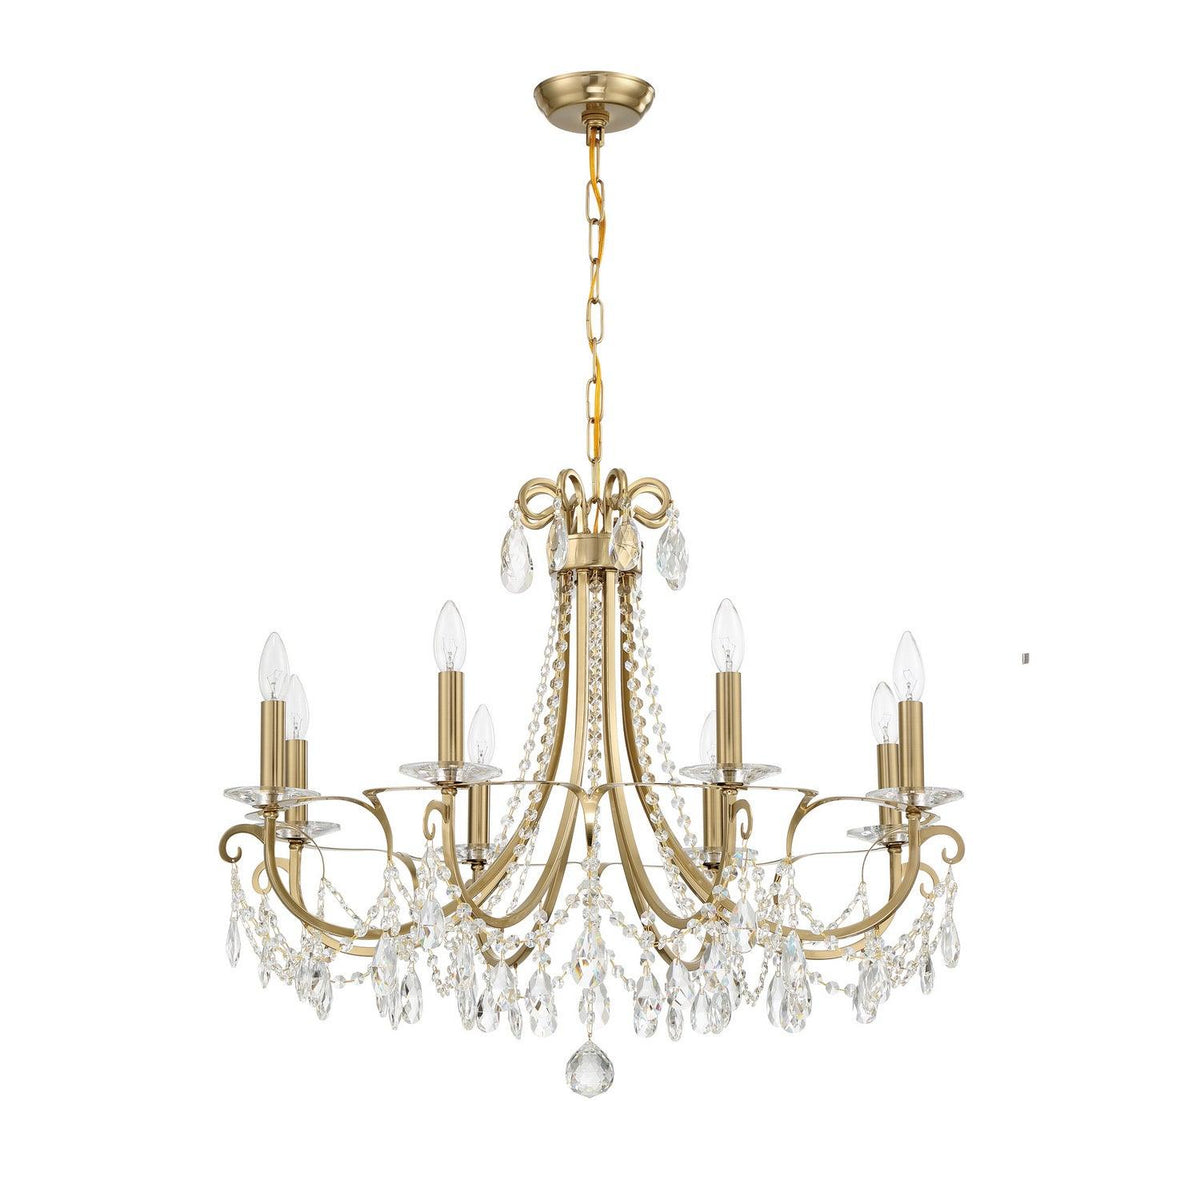 Crystorama - Othello Chandelier - 6828-VG-CL-MWP | Montreal Lighting & Hardware